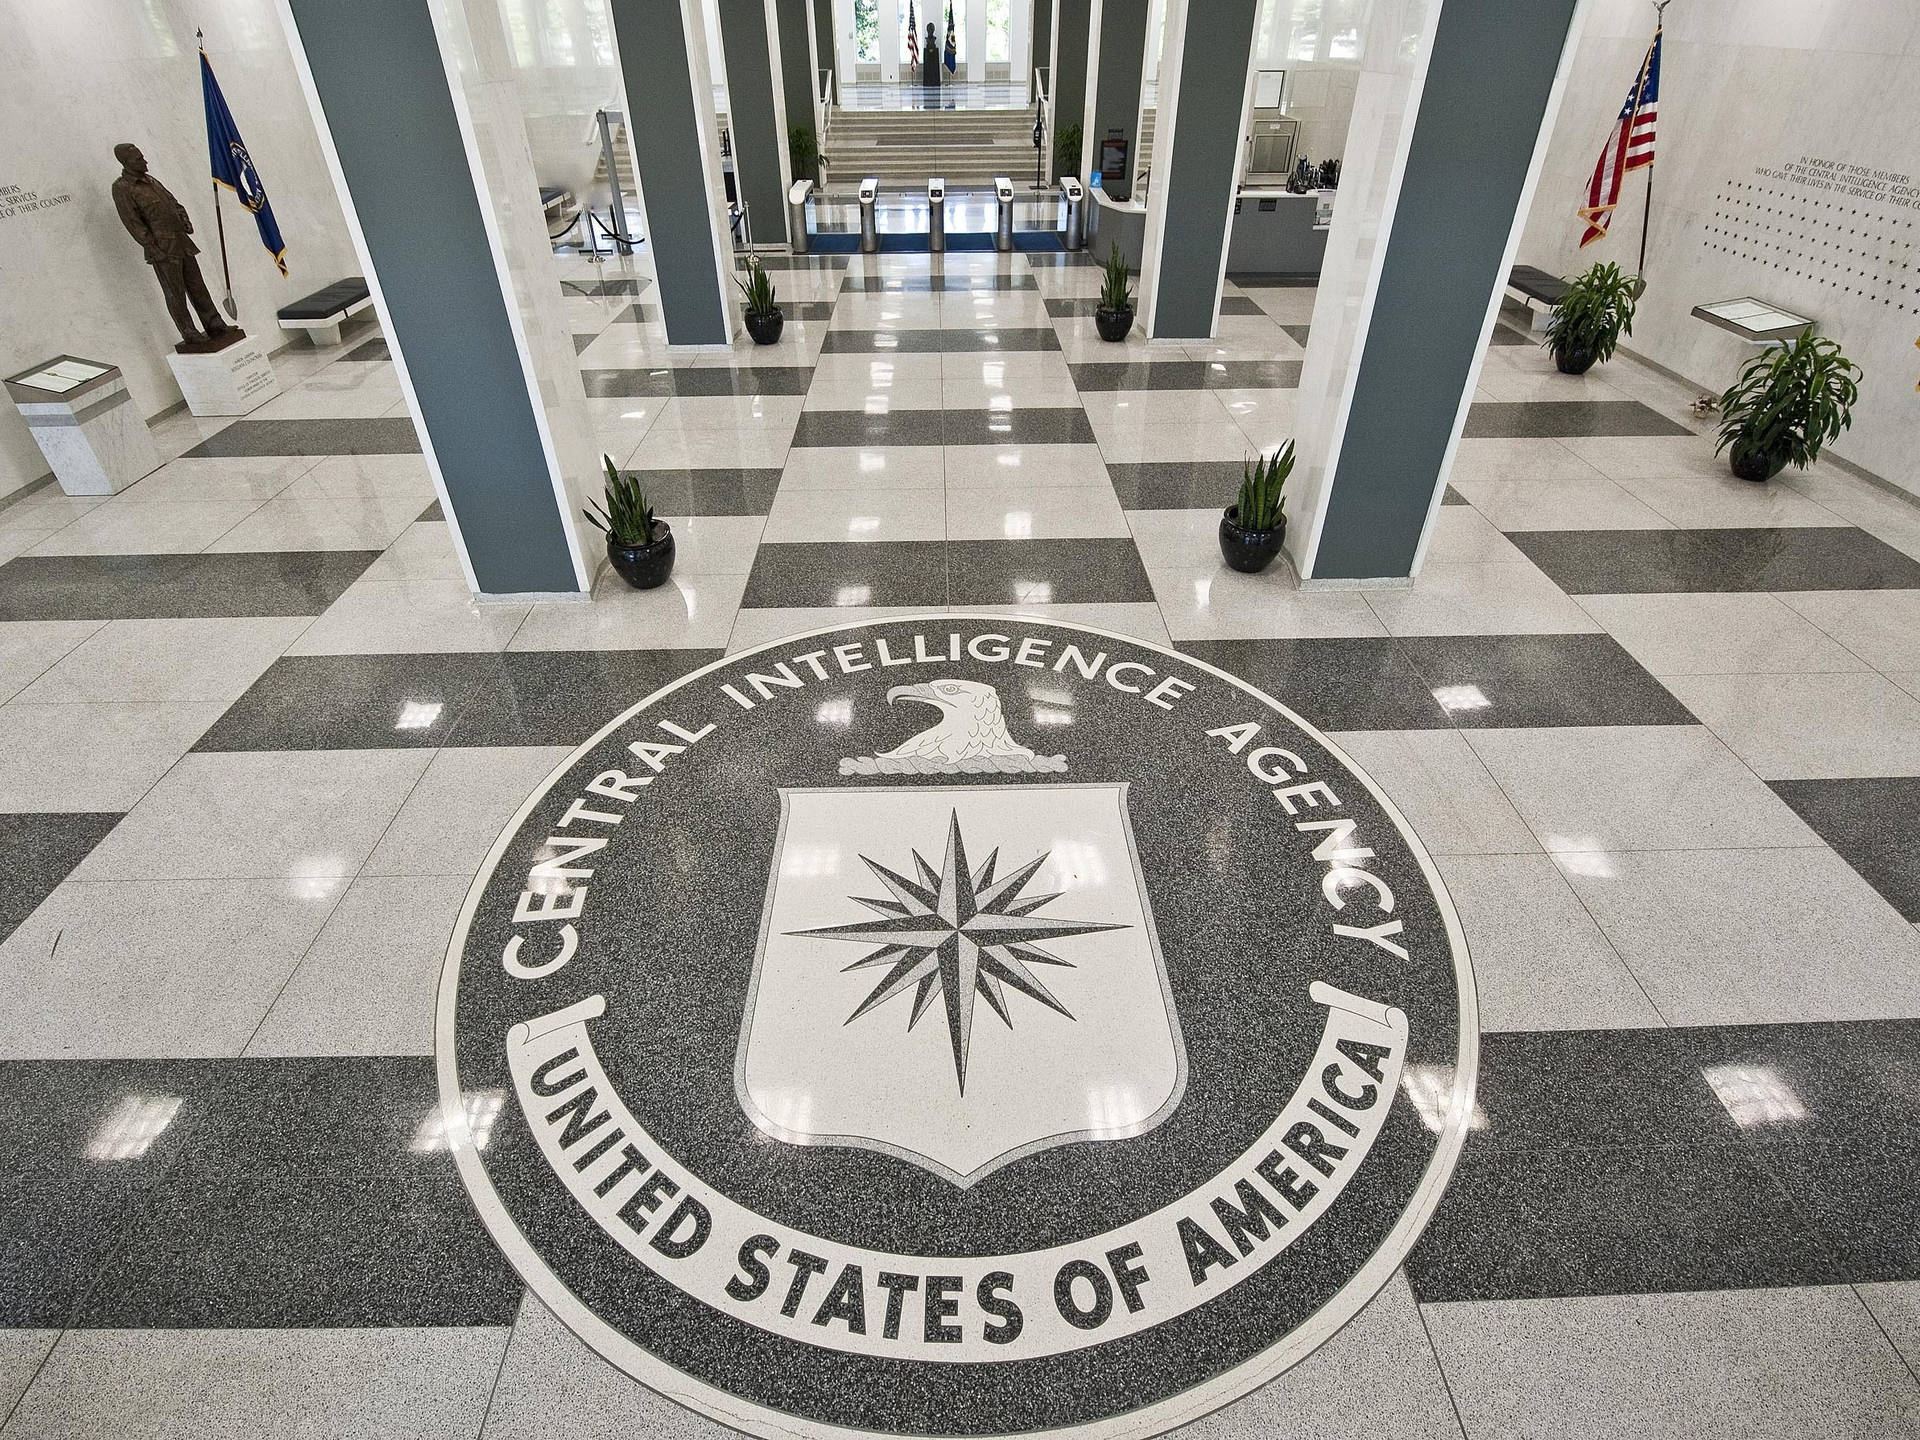 Emblem of Authority - CIA Logo on Government Building Wallpaper